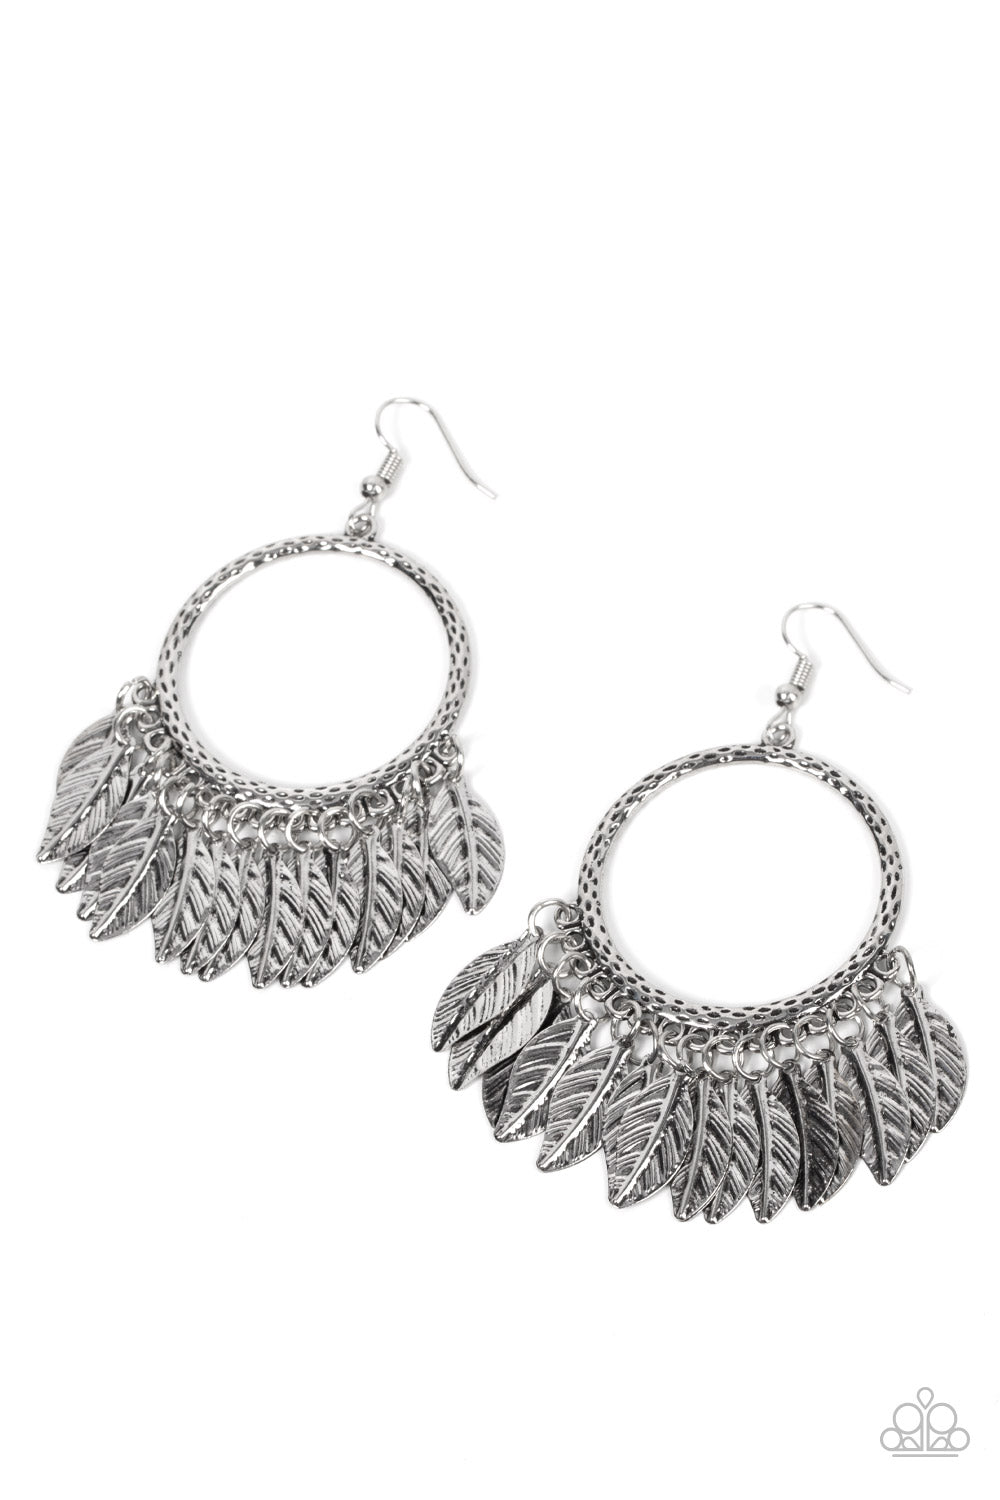 five-dollar-jewelry-fowl-tempered-silver-earrings-paparazzi-accessories